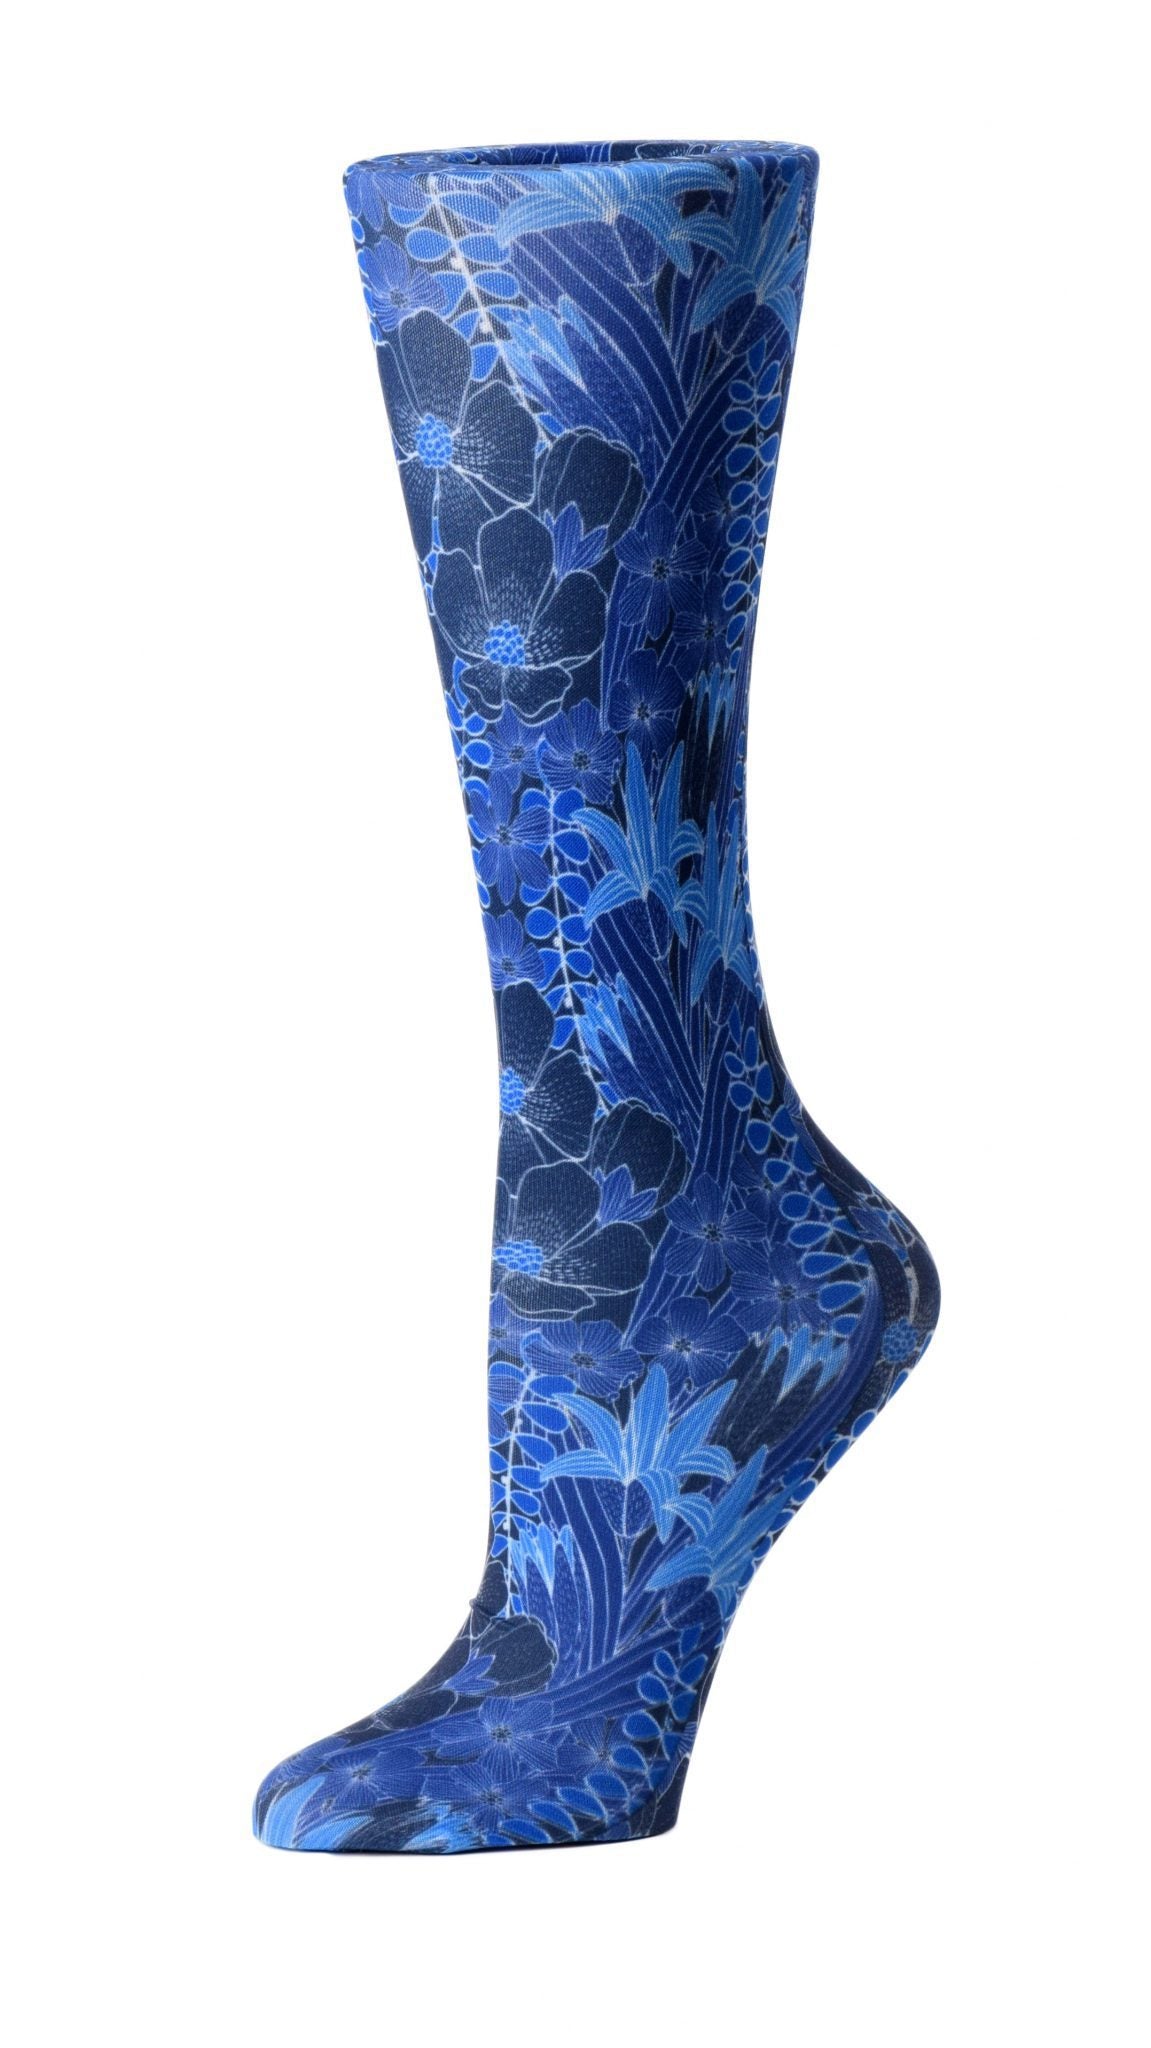 Cutieful Moderate Compression Socks 10-18 mmHg Knit in Print Patterns Blue Flowers at Parker's Clothing and Shoes.